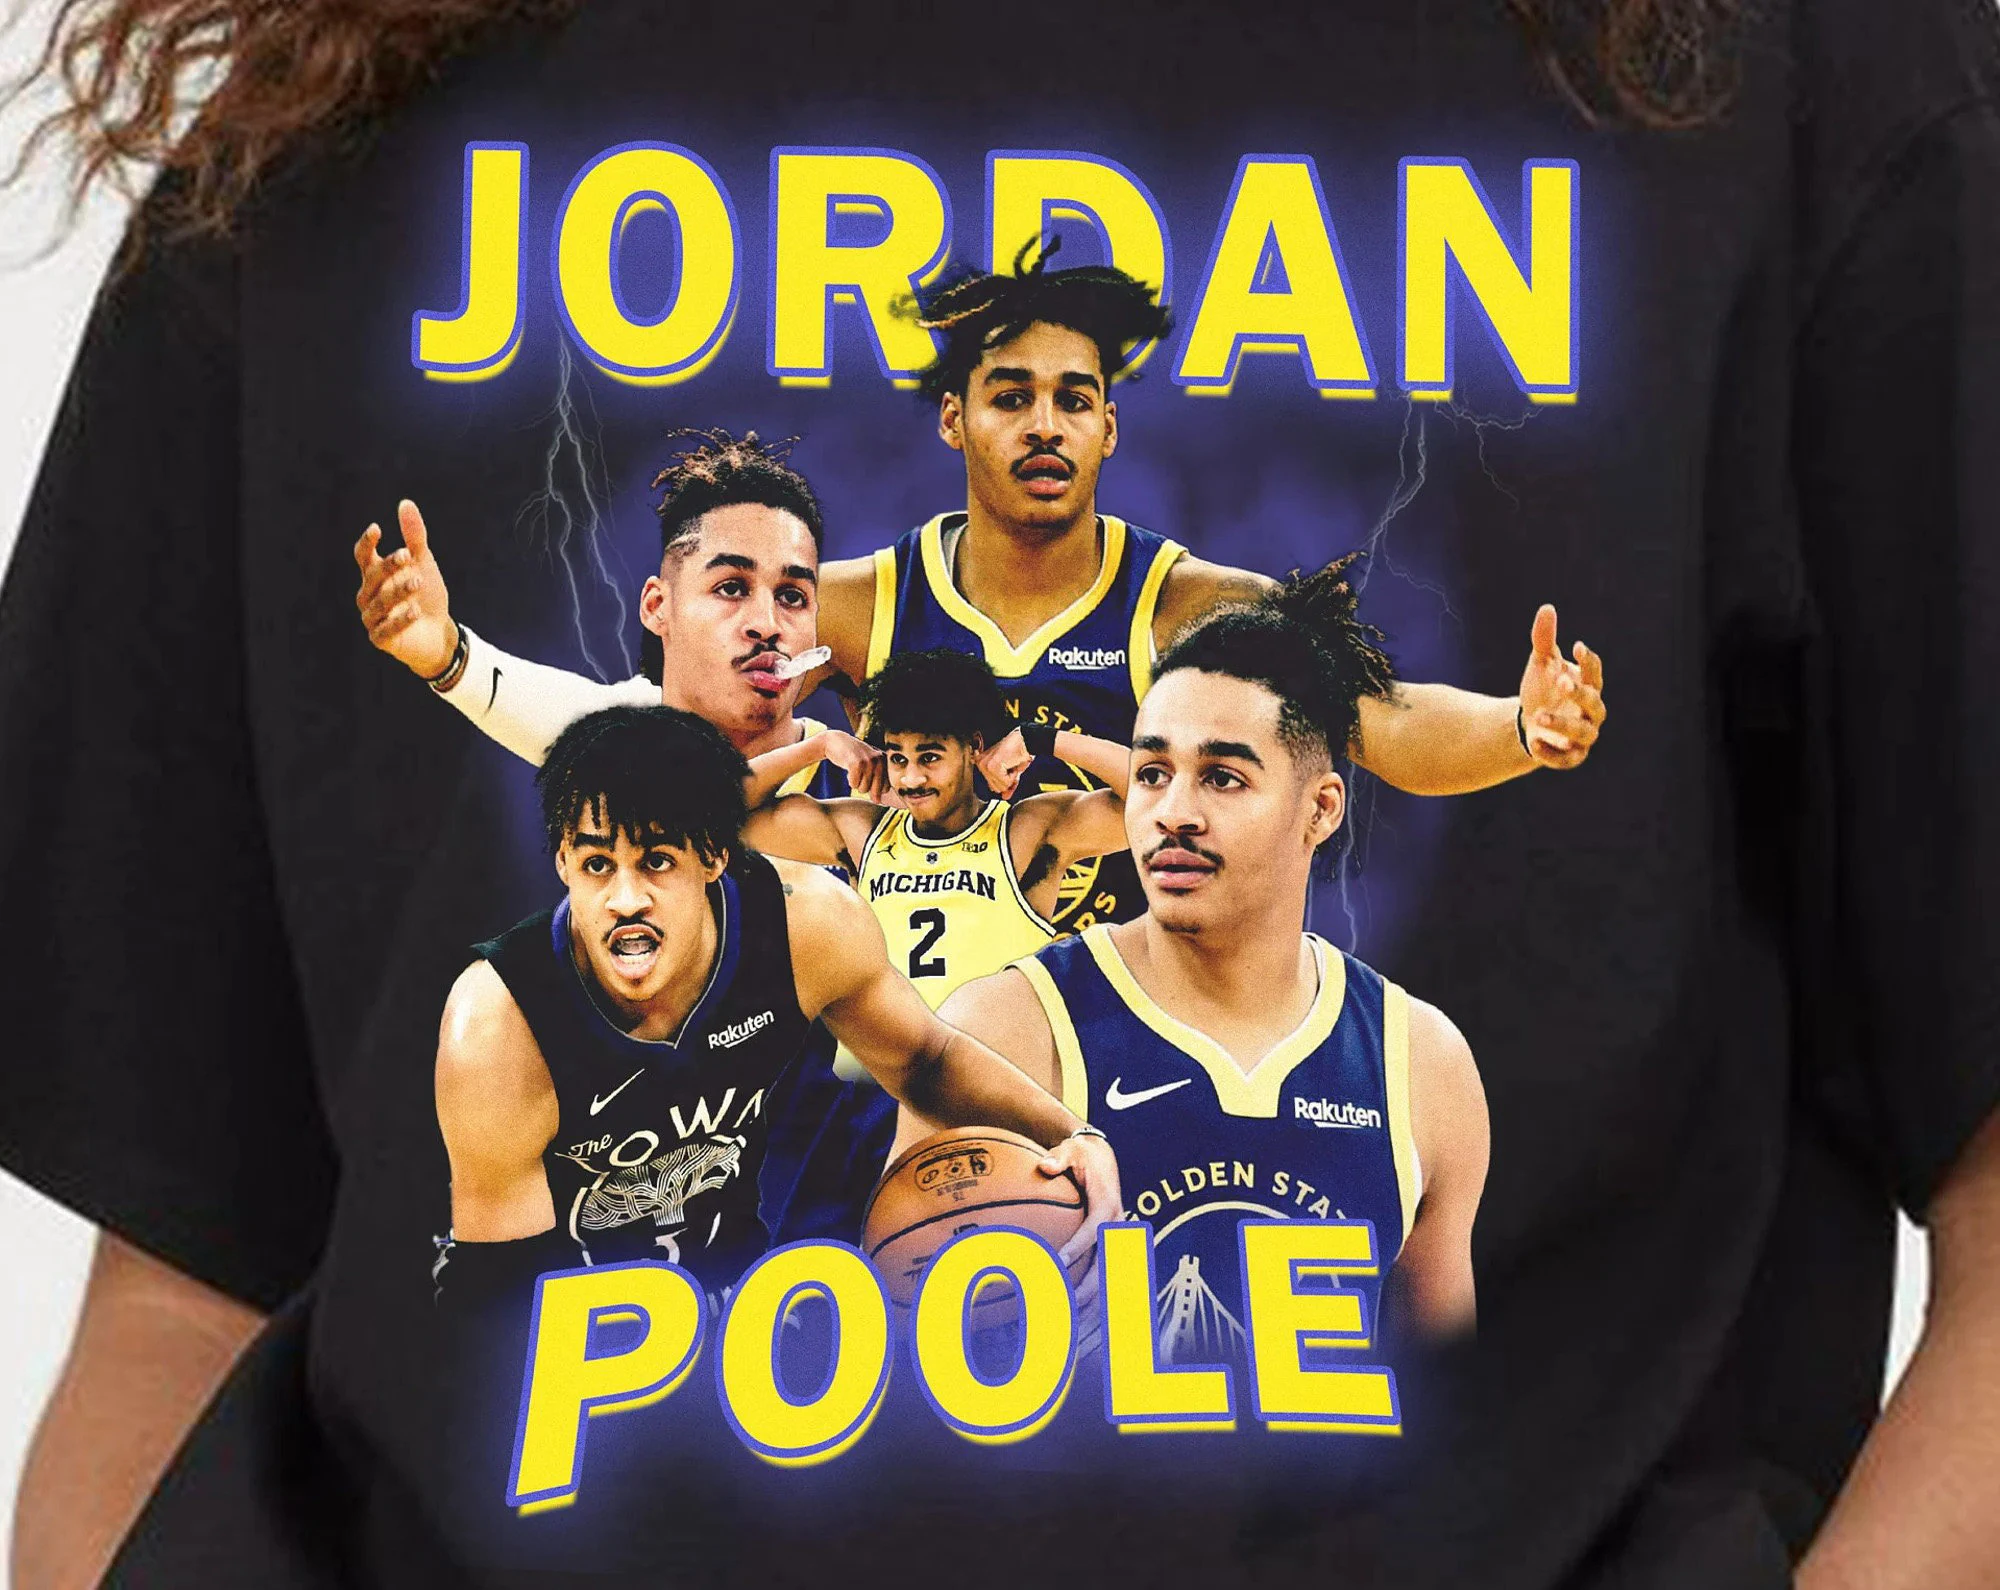 Jordan Poole Vintage 90s Style Basketball Shirt - Jolly Family Gifts